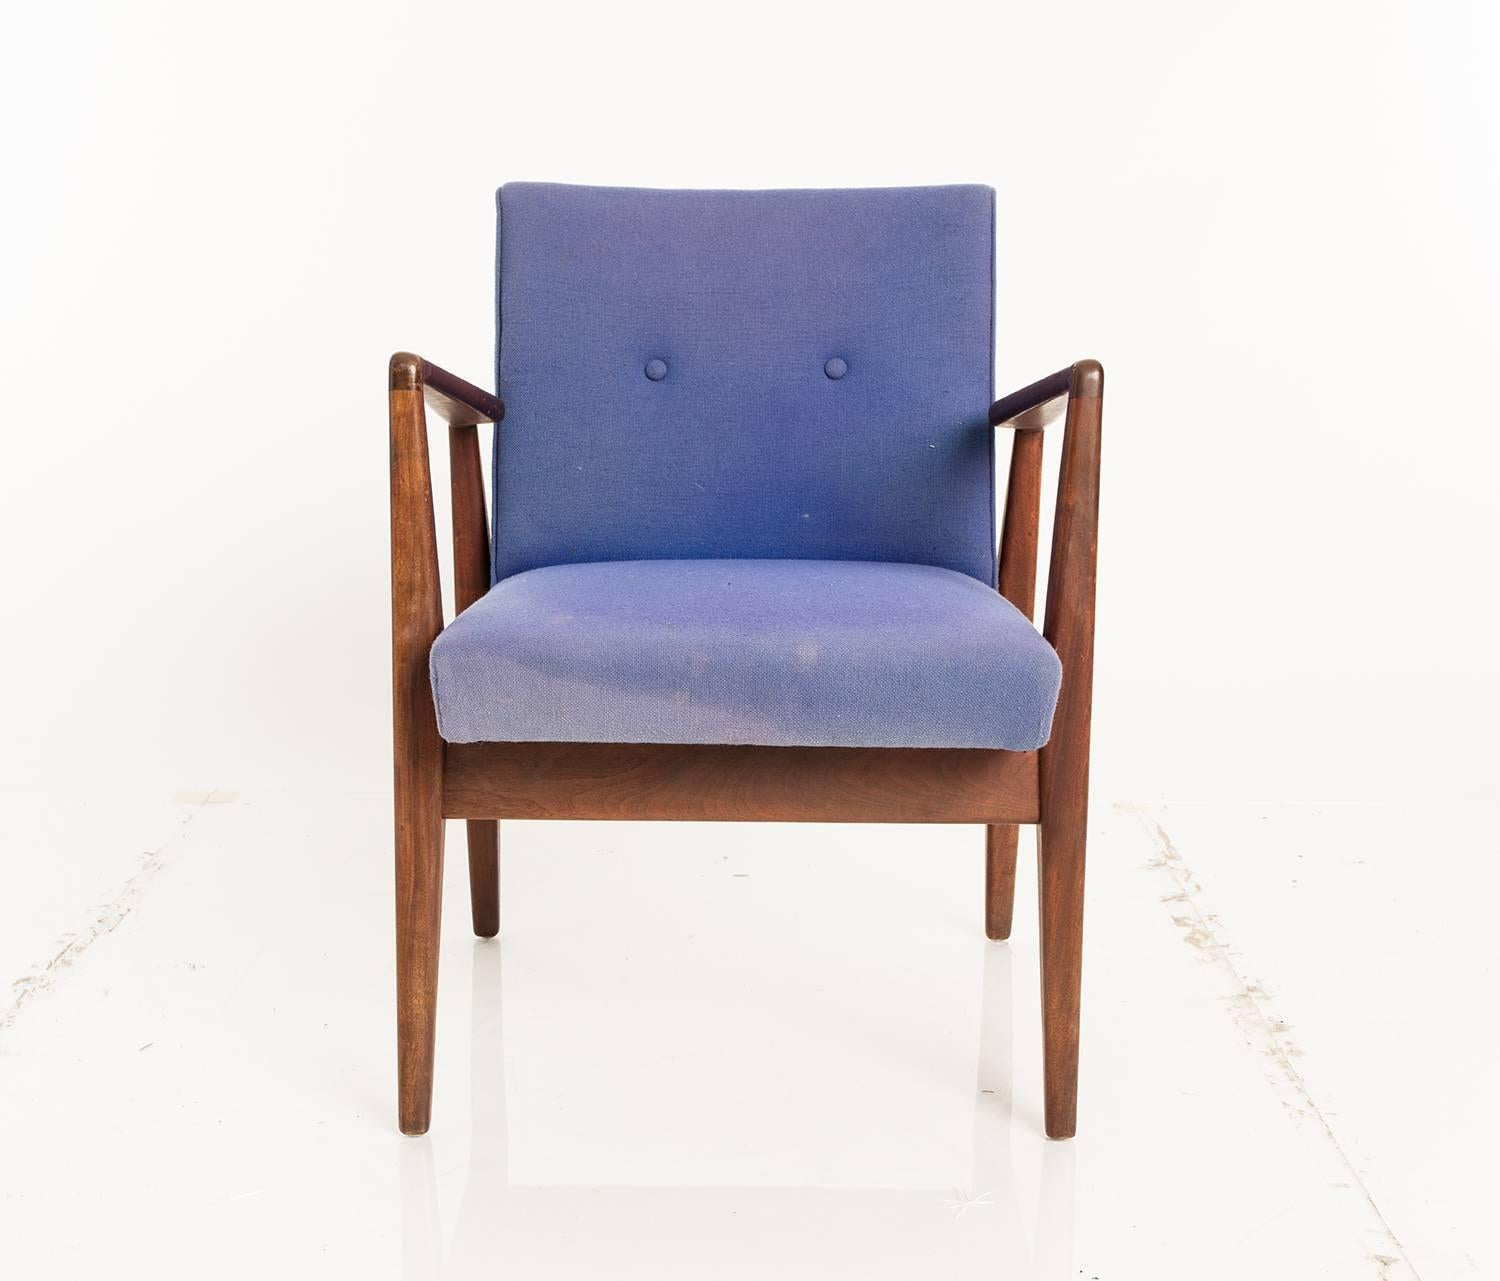 Pair of Mid-Century Modern teak open armchairs upholstered in a blue fabric.